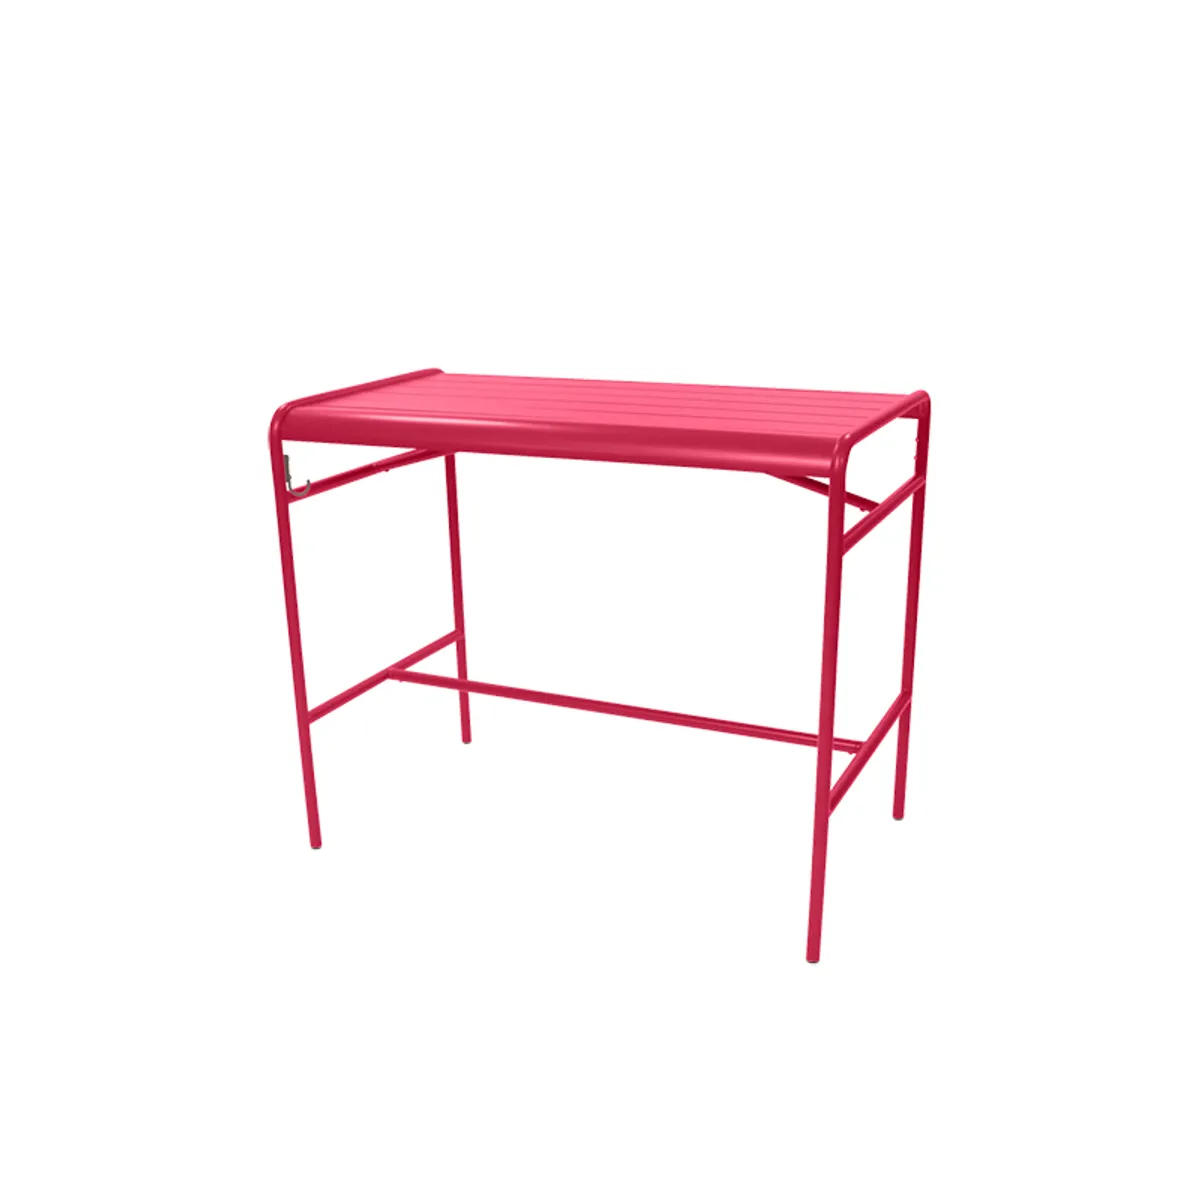 Luxembourg High Table Outdoor Furniture For Cafes And Bars Pink